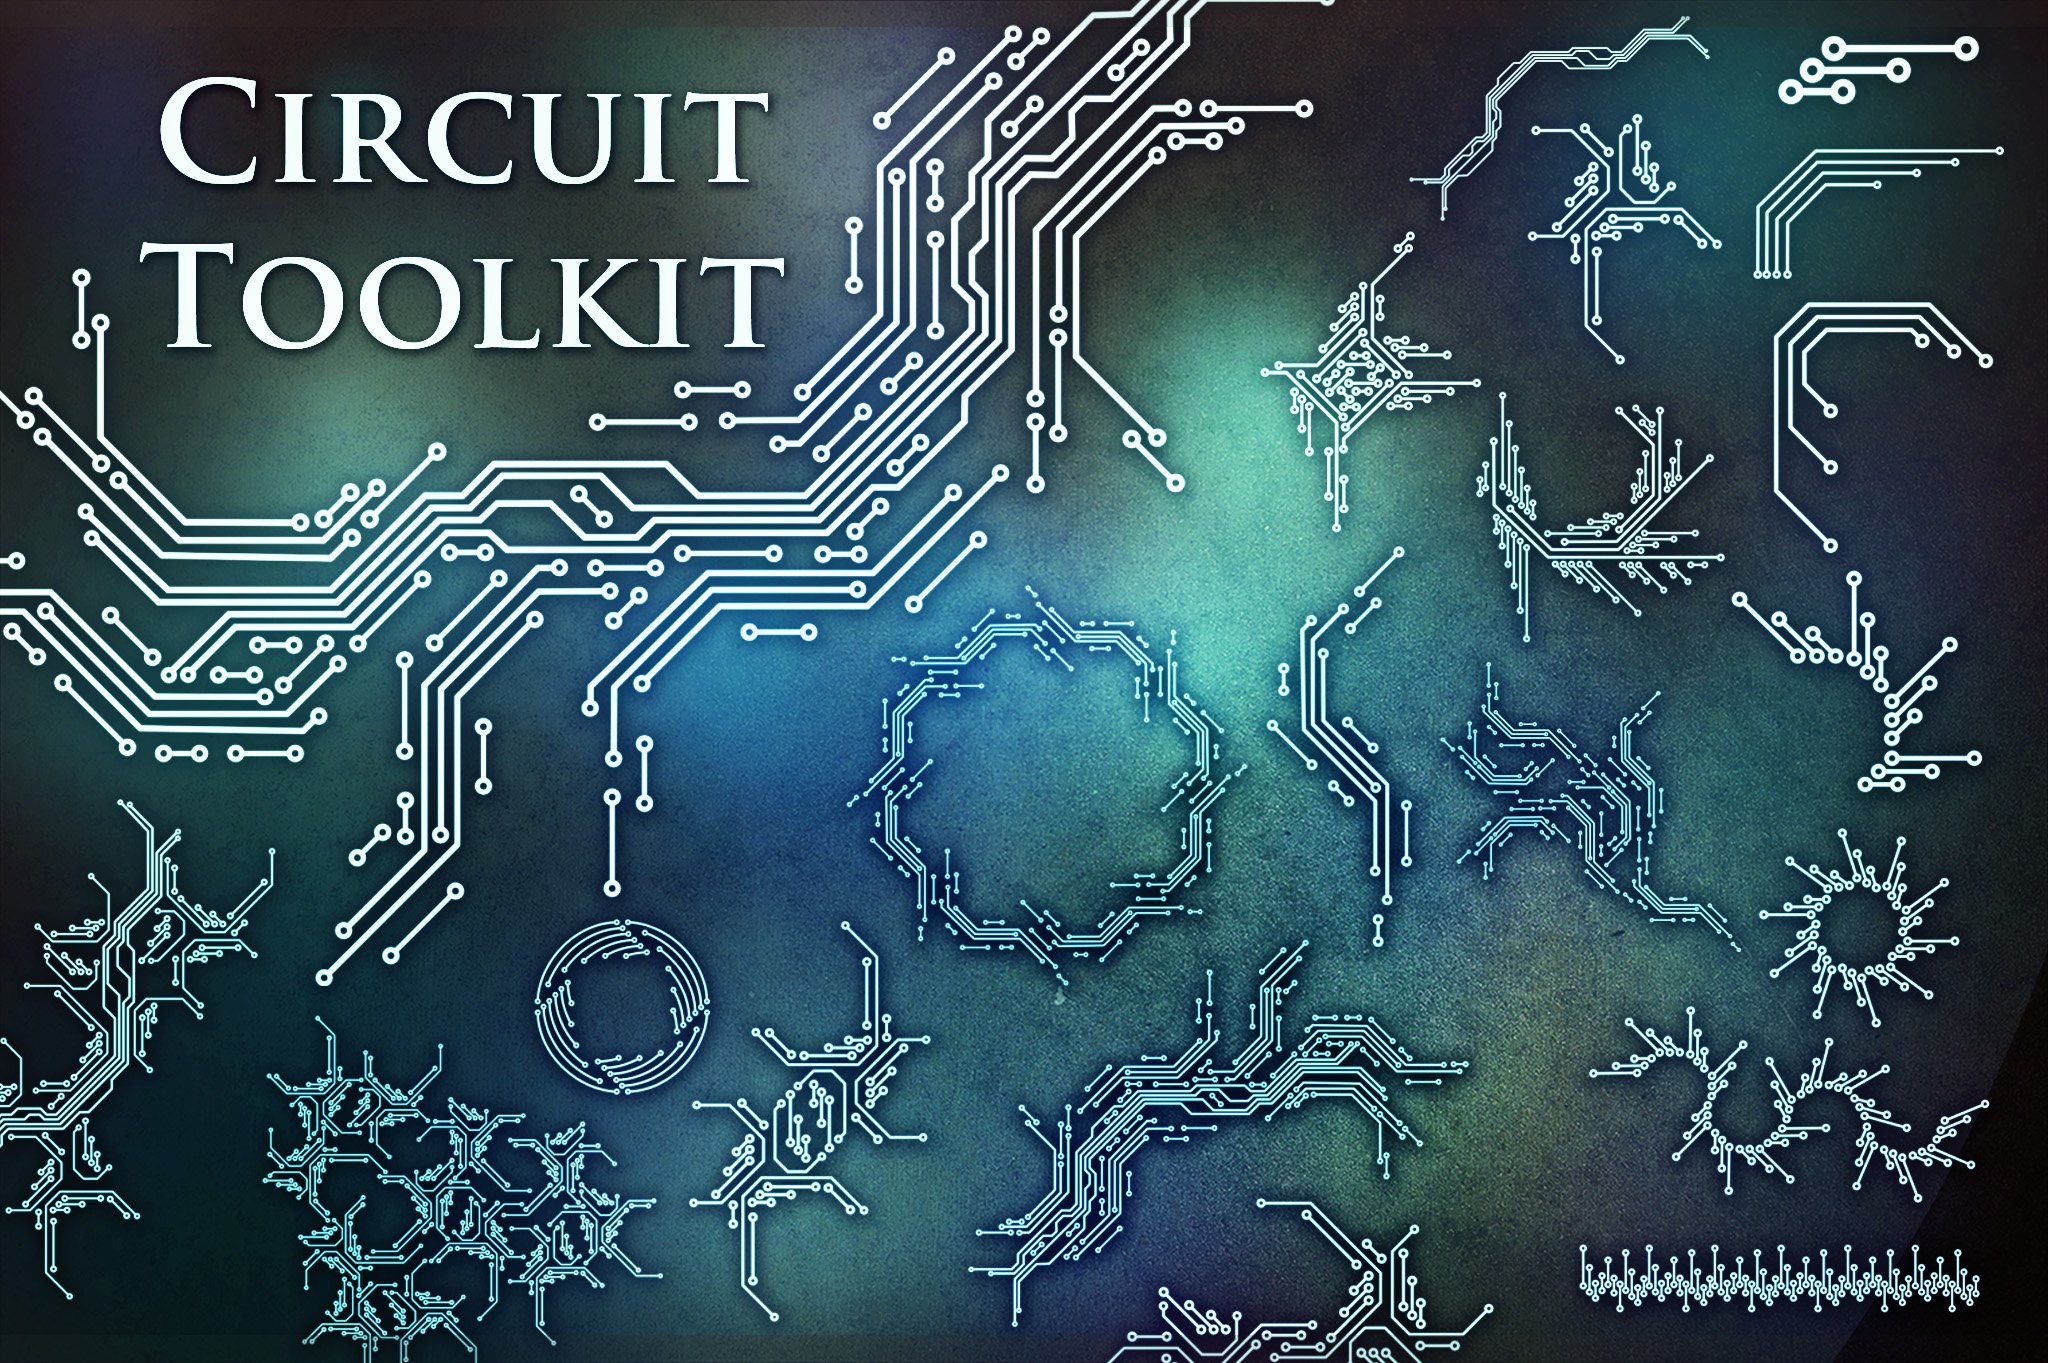 Circuit Toolkit(SVG/PNG/EPS/ABR)cover image.